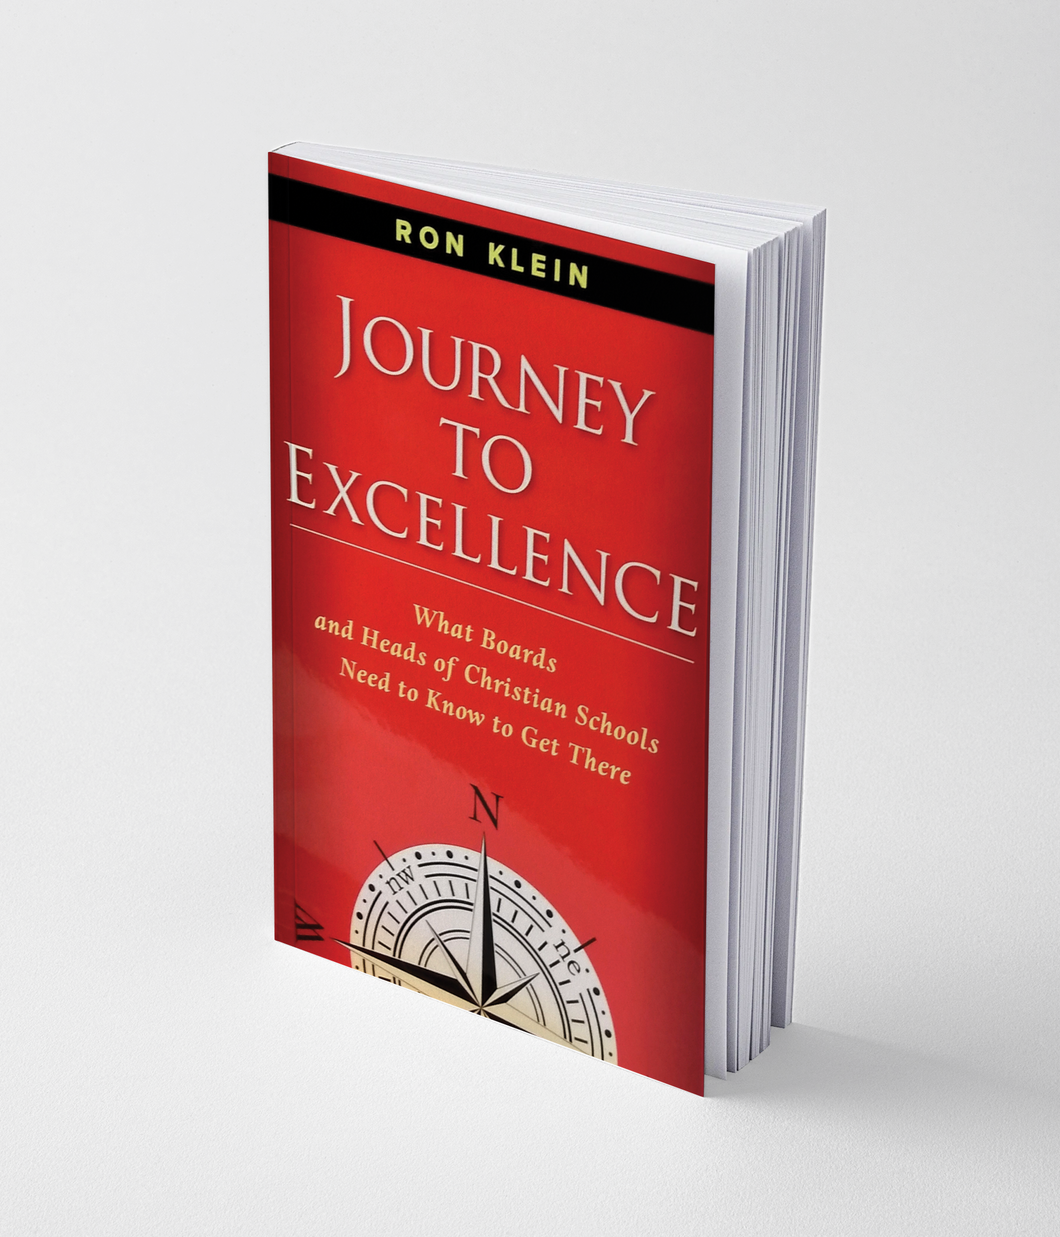 Journey to Excellence by Ron Klein